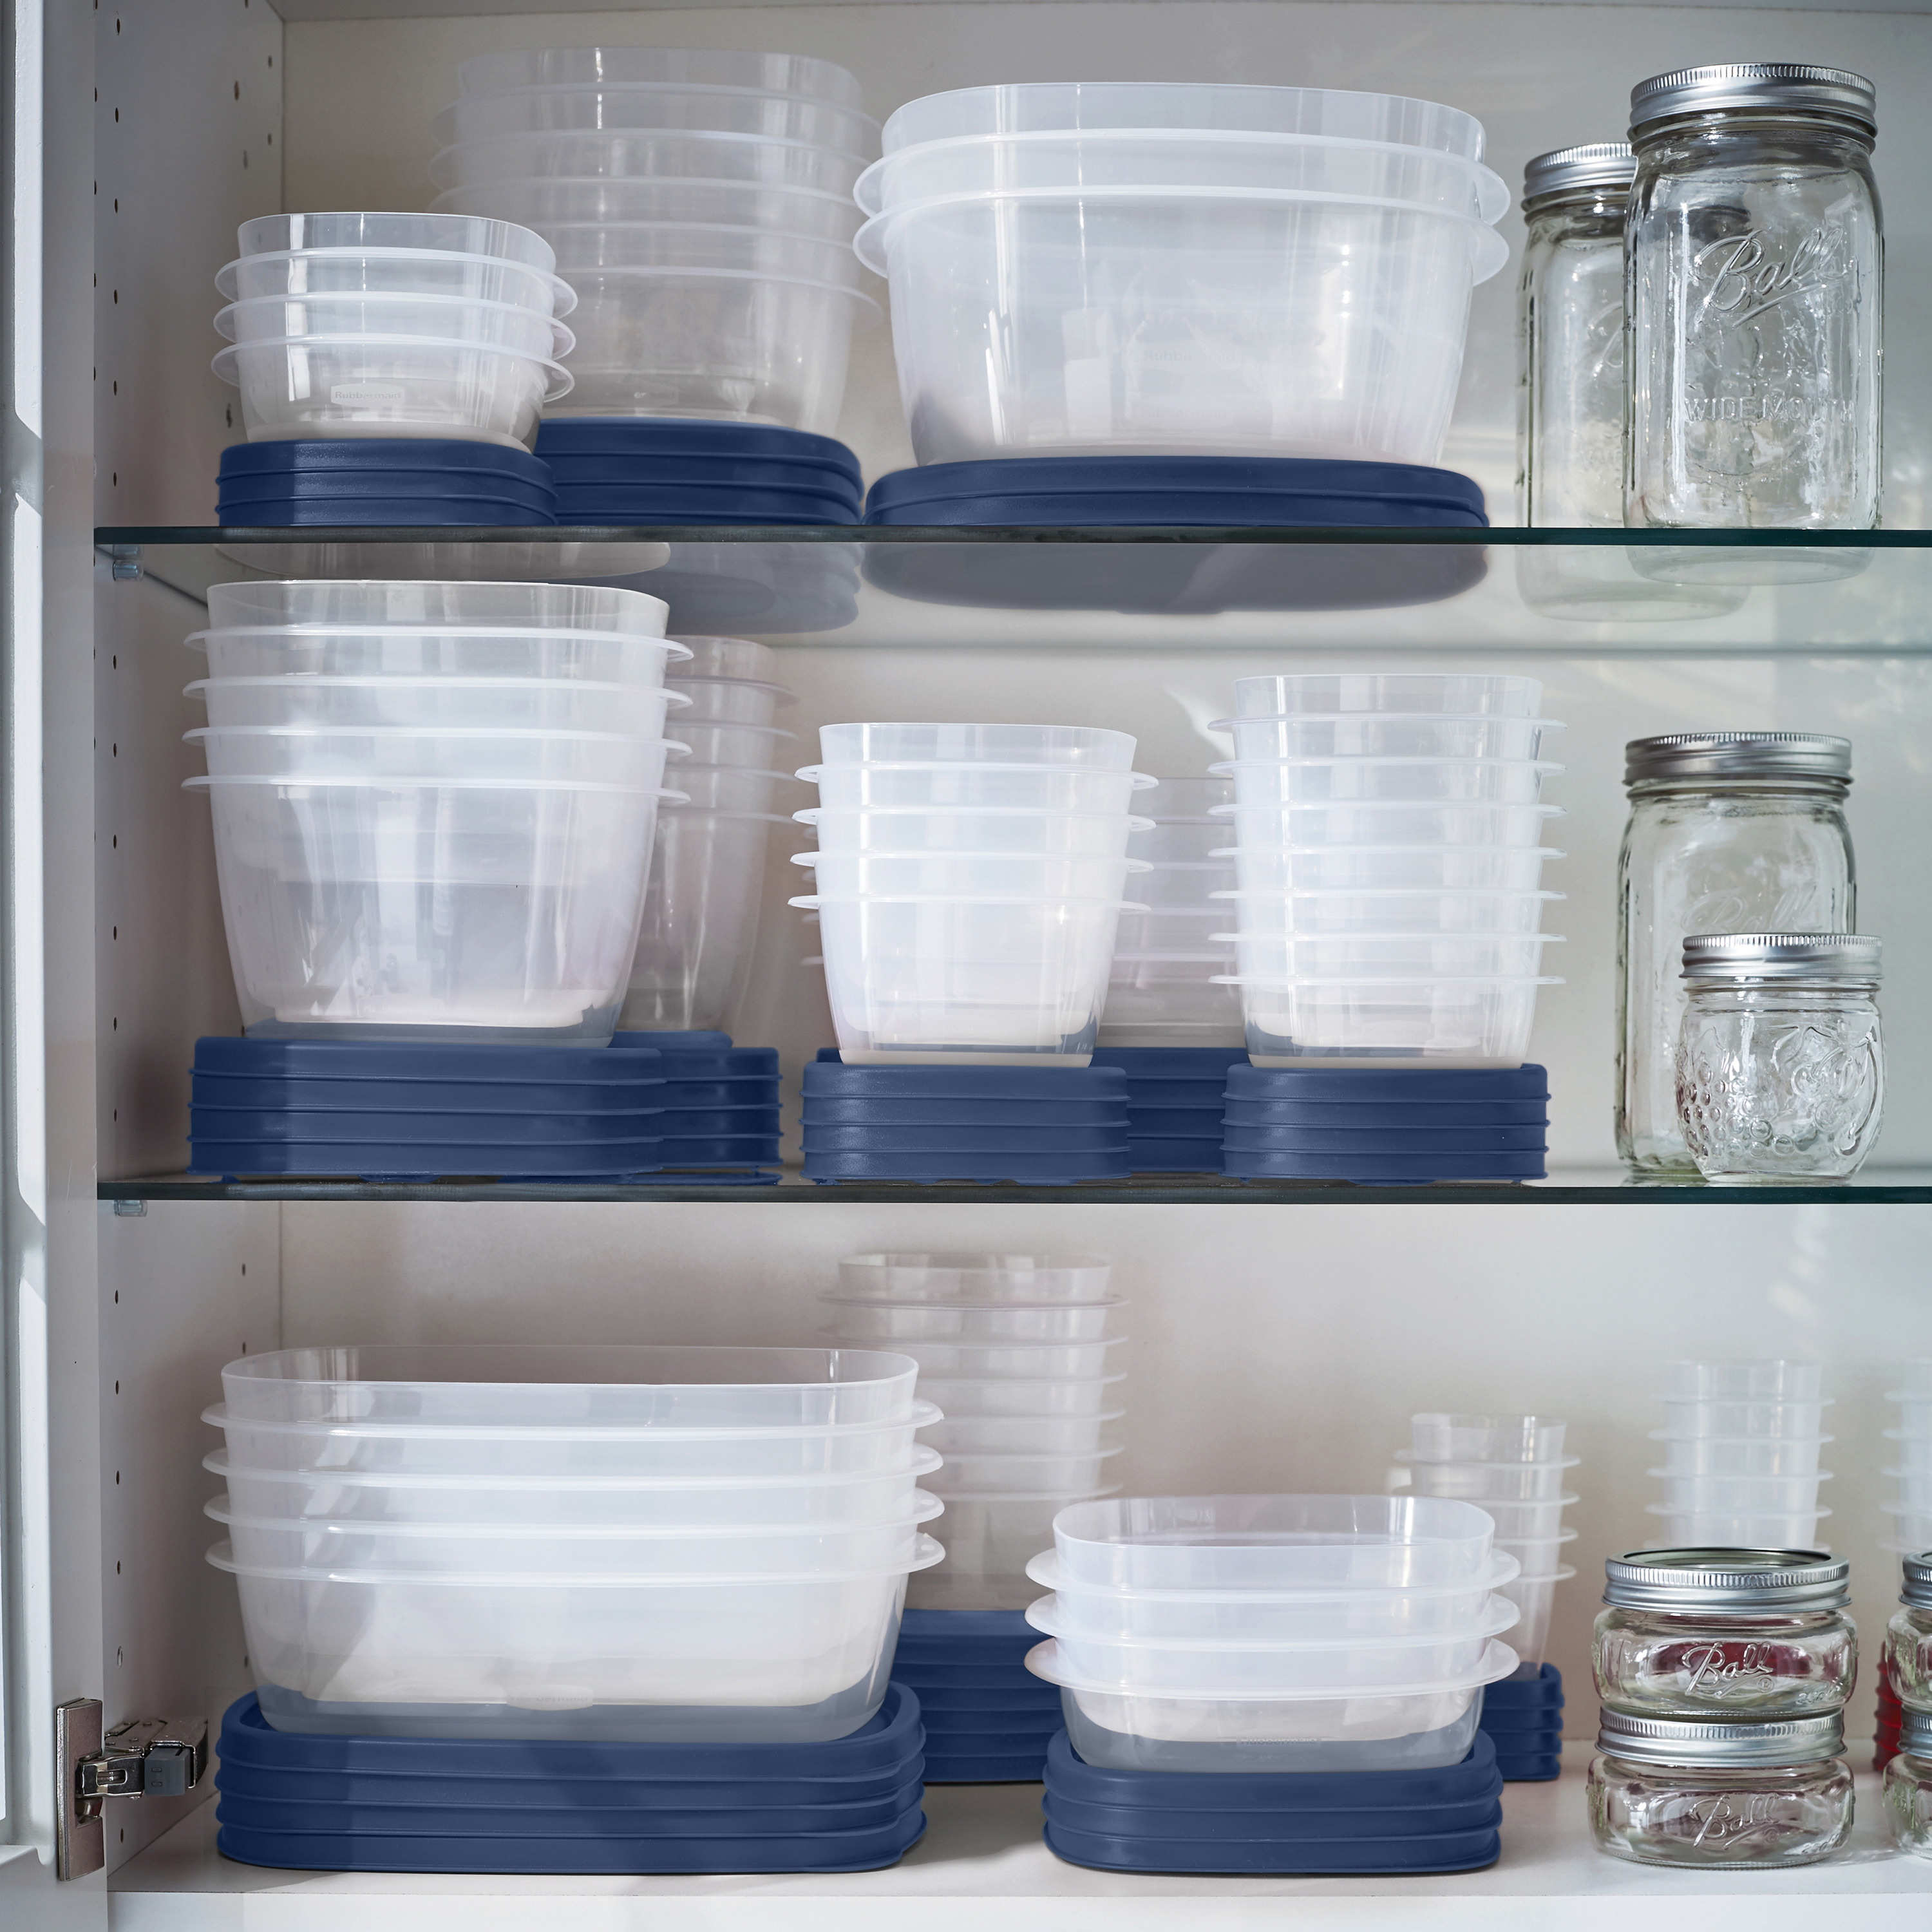 Rubbermaid EasyFindLids Variety Set of 13 Vented Plastic Food Storage Containers with Navy Lids (26 Pieces Total) - image 4 of 7